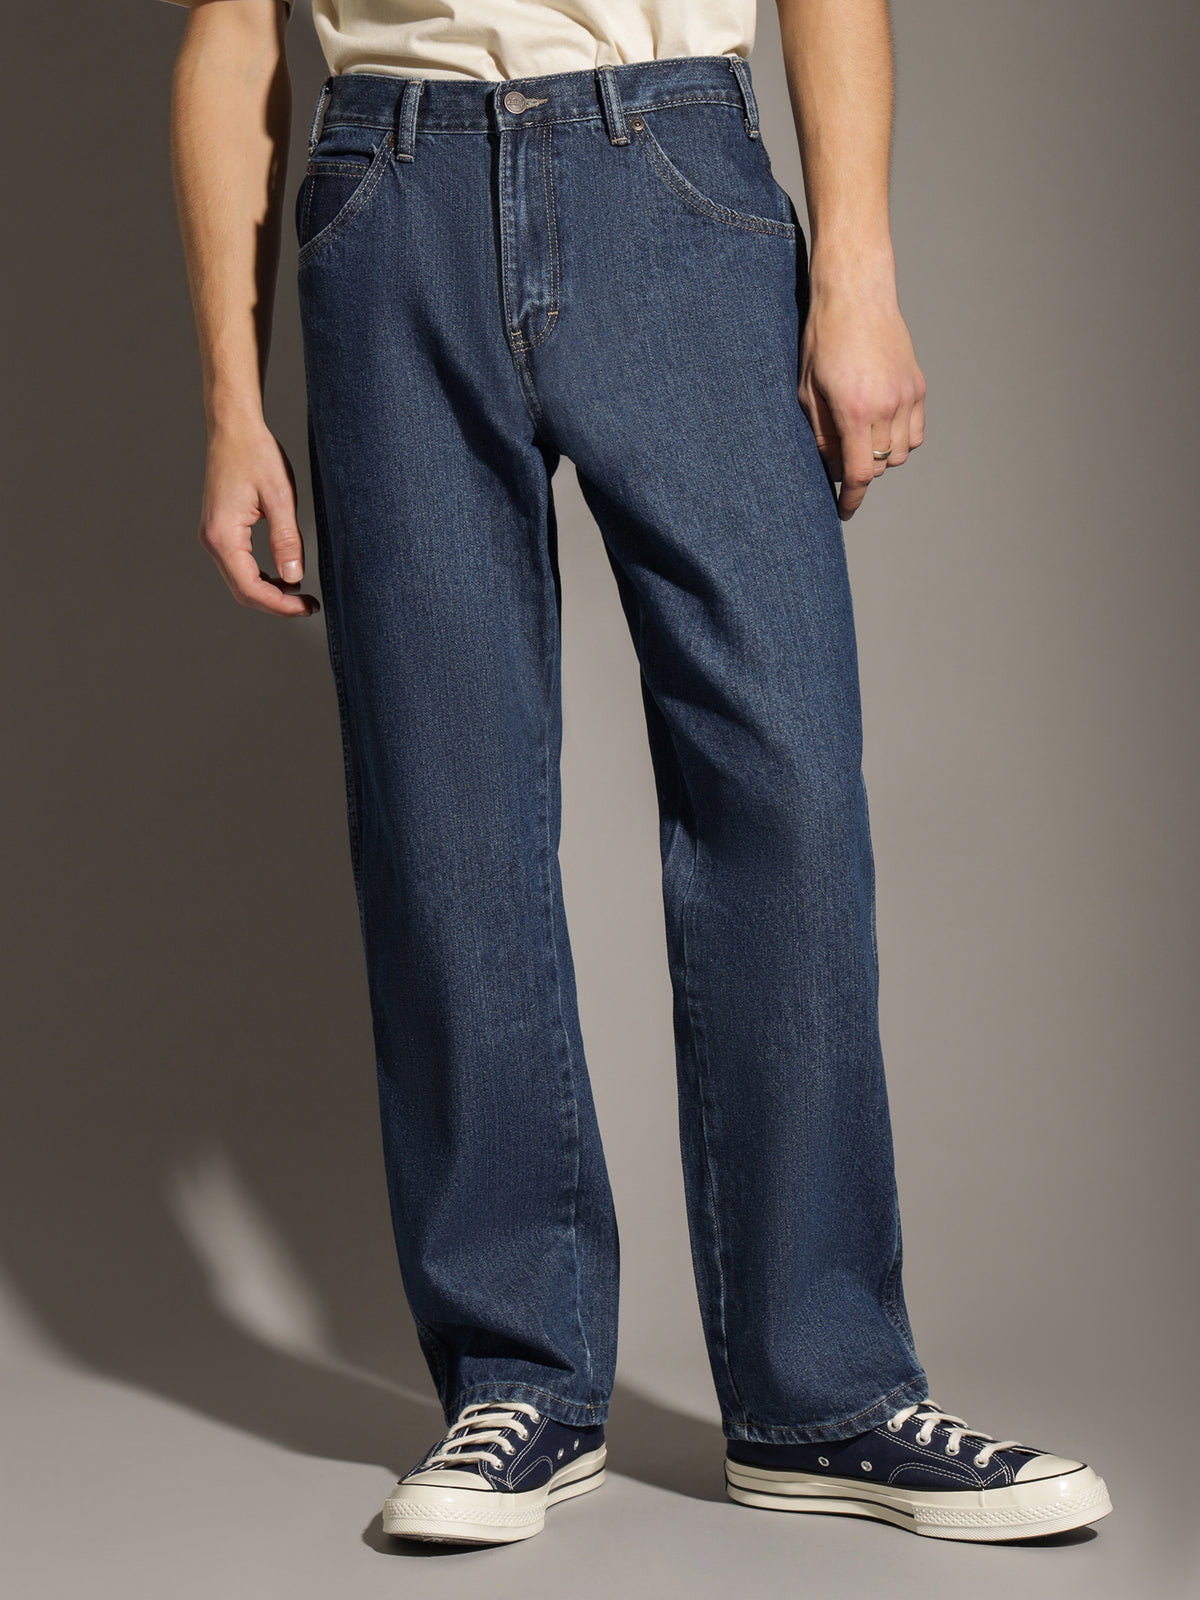 Relaxed Straight Fit 5-Pocket Jeans in Stone Washed Indigo Blue